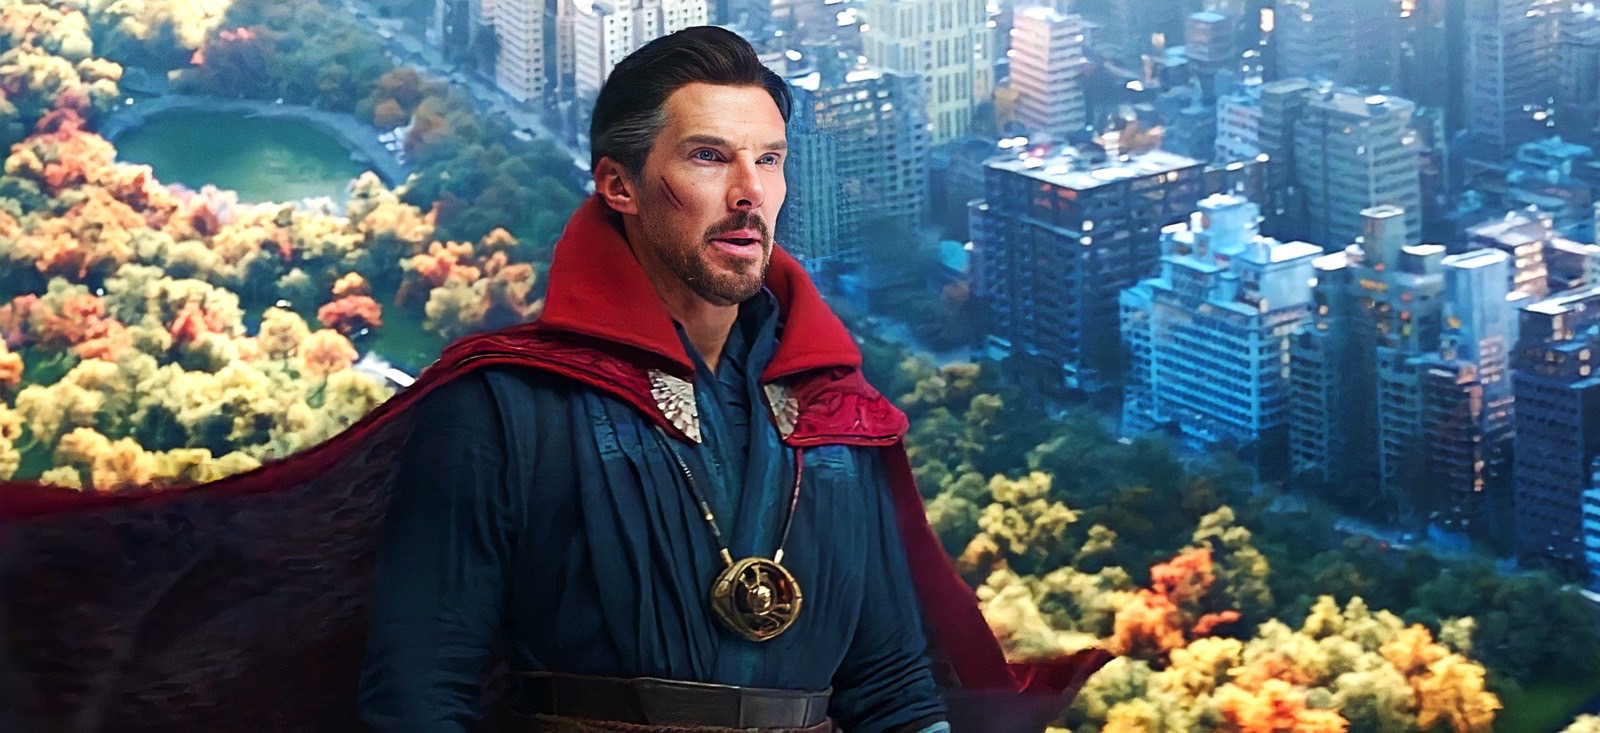 The purported Doctor Strange 2 photo may reveal one of the biggest cameos in the movie